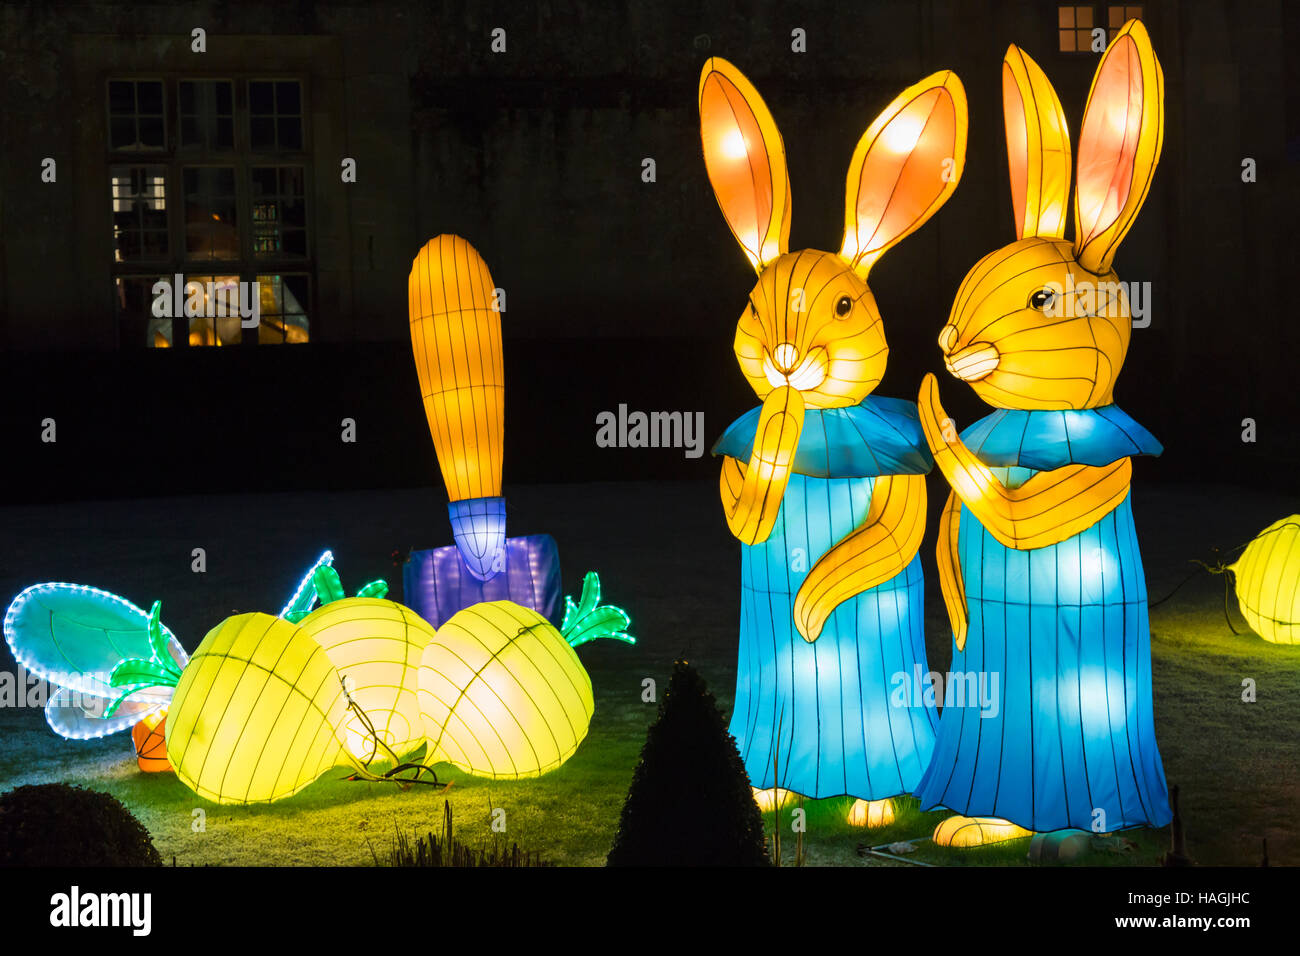 Longleat, Warminster, Wiltshire, UK. 1 December 2016. Christmas Festival of Light at Longleat to celebrate the Safari Park's 50th anniversary with the theme of Beatrix Potter. Crowds flock to see the lights on a bitter cold evening. bunny rabbits in the garden Credit:  Carolyn Jenkins/Alamy Live News Stock Photo